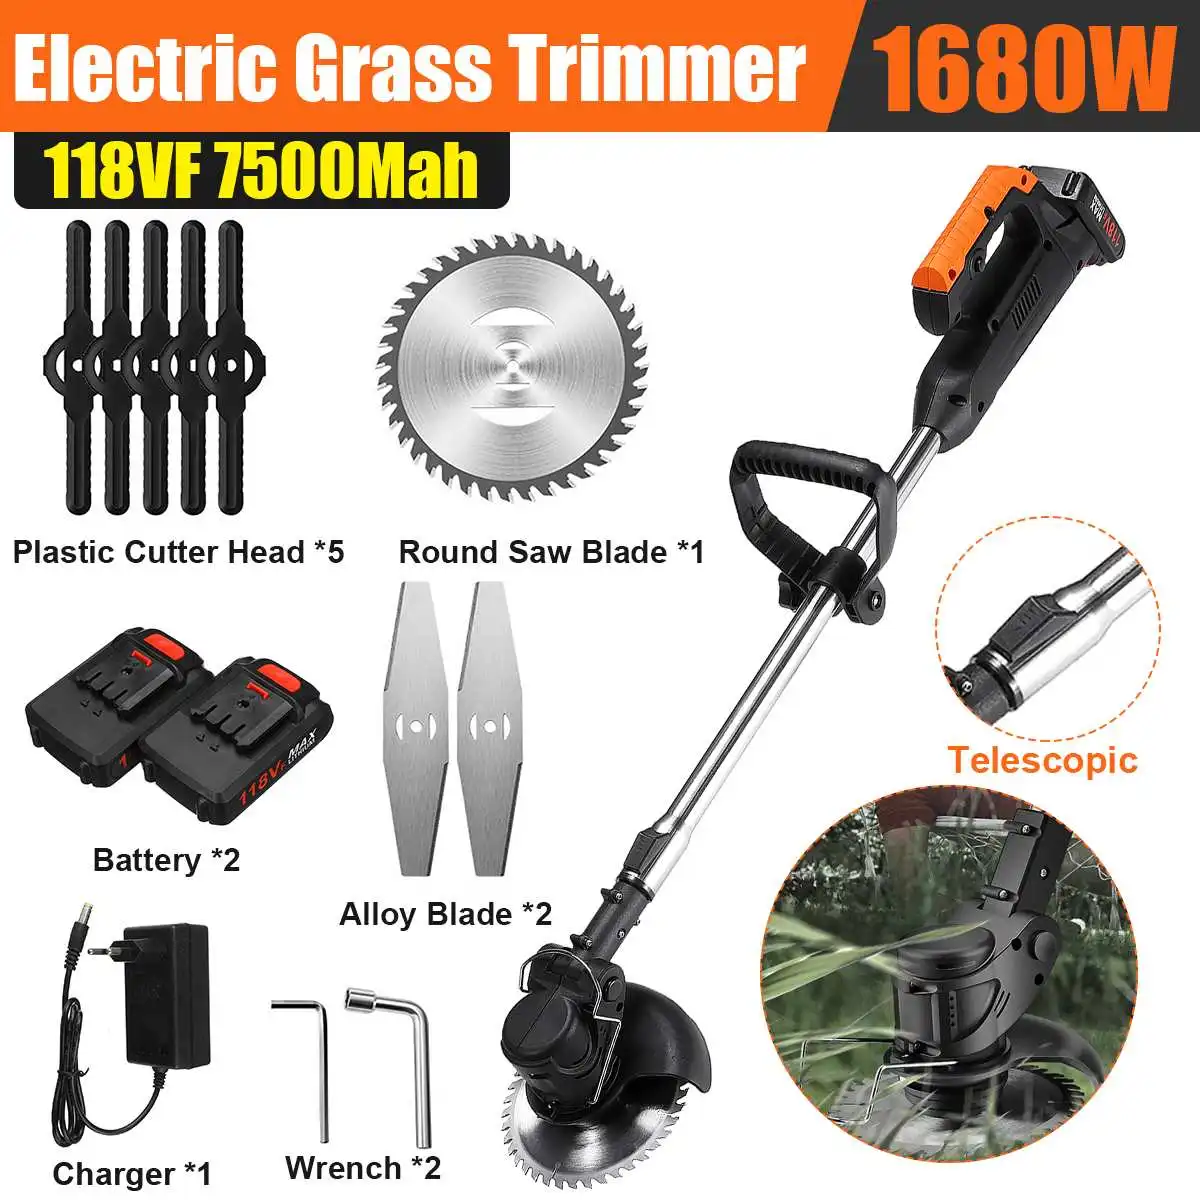 Electric Lawn Mower Rechargeable Li-ion Battery Cordless Telescopic Grass Trimmer Portable Garden Tools Home Trimming Machine